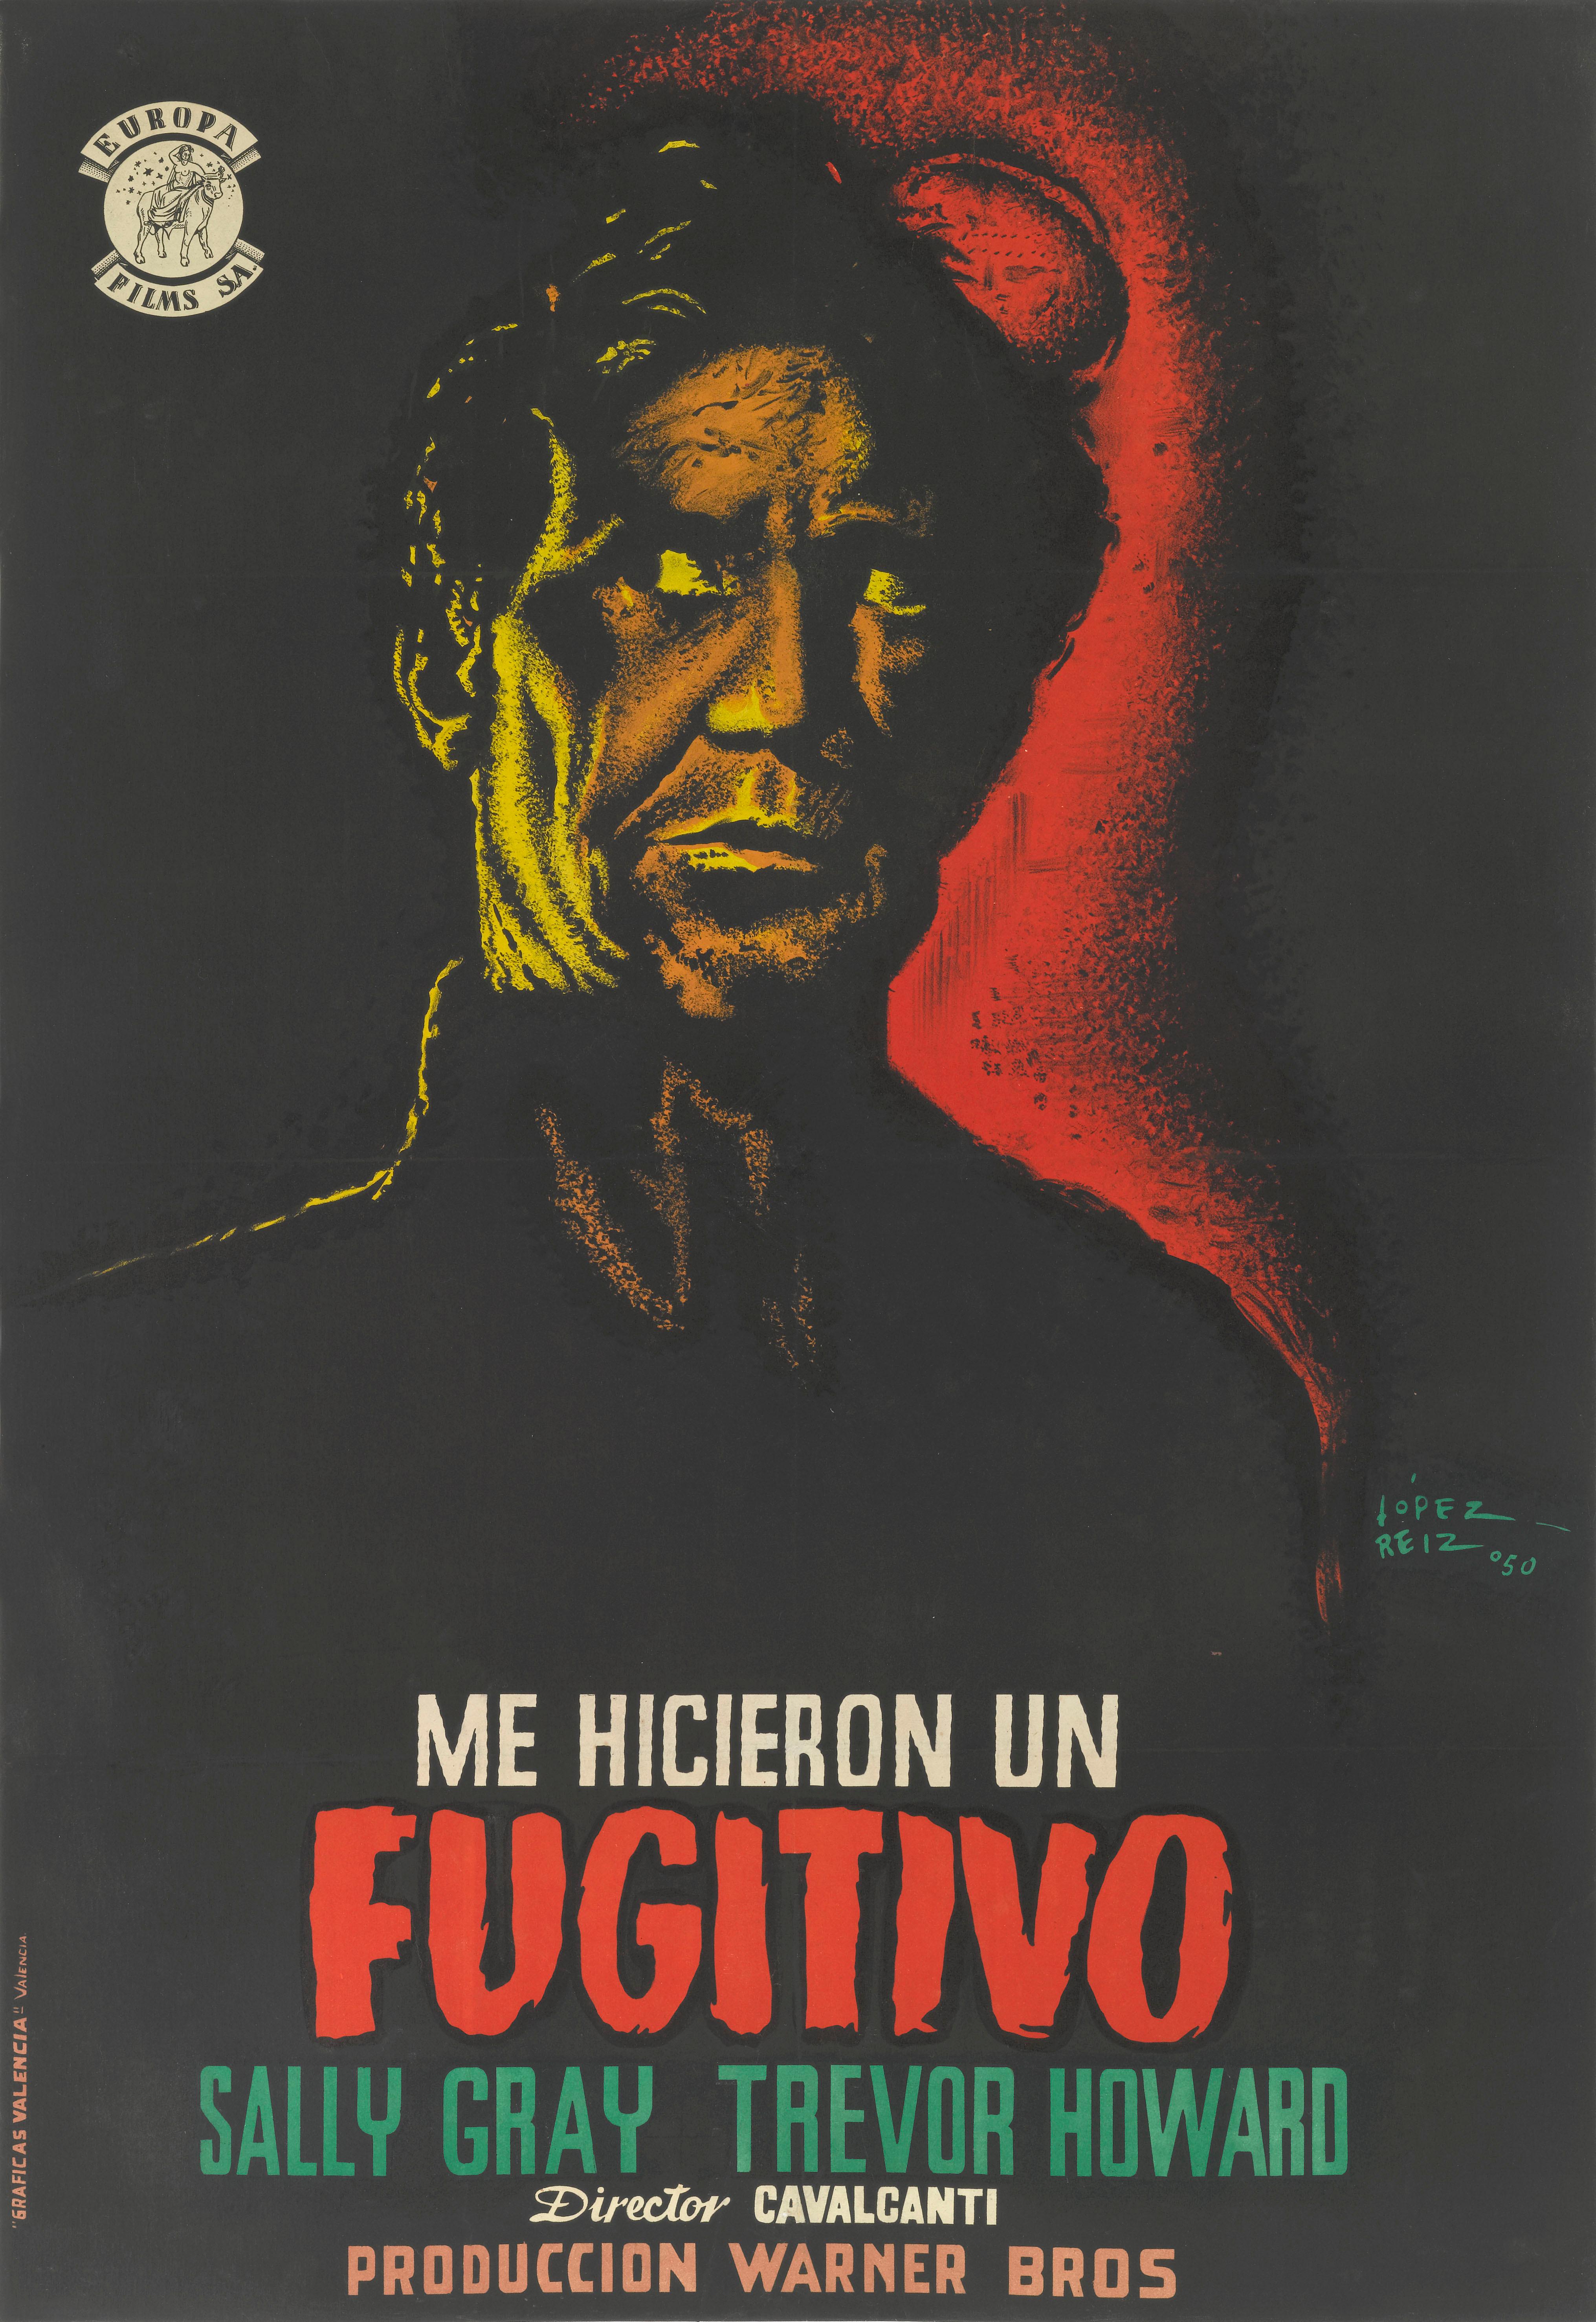 Original Spanish film poster for the 1947 Film Noir They Made Me a Fugitive.
This film was directed Alberto Cavalcanti and starred Trevor Howard and Sally Gray.
The striking artwork is by Lopez Reiz, and was used for the films first Spanish